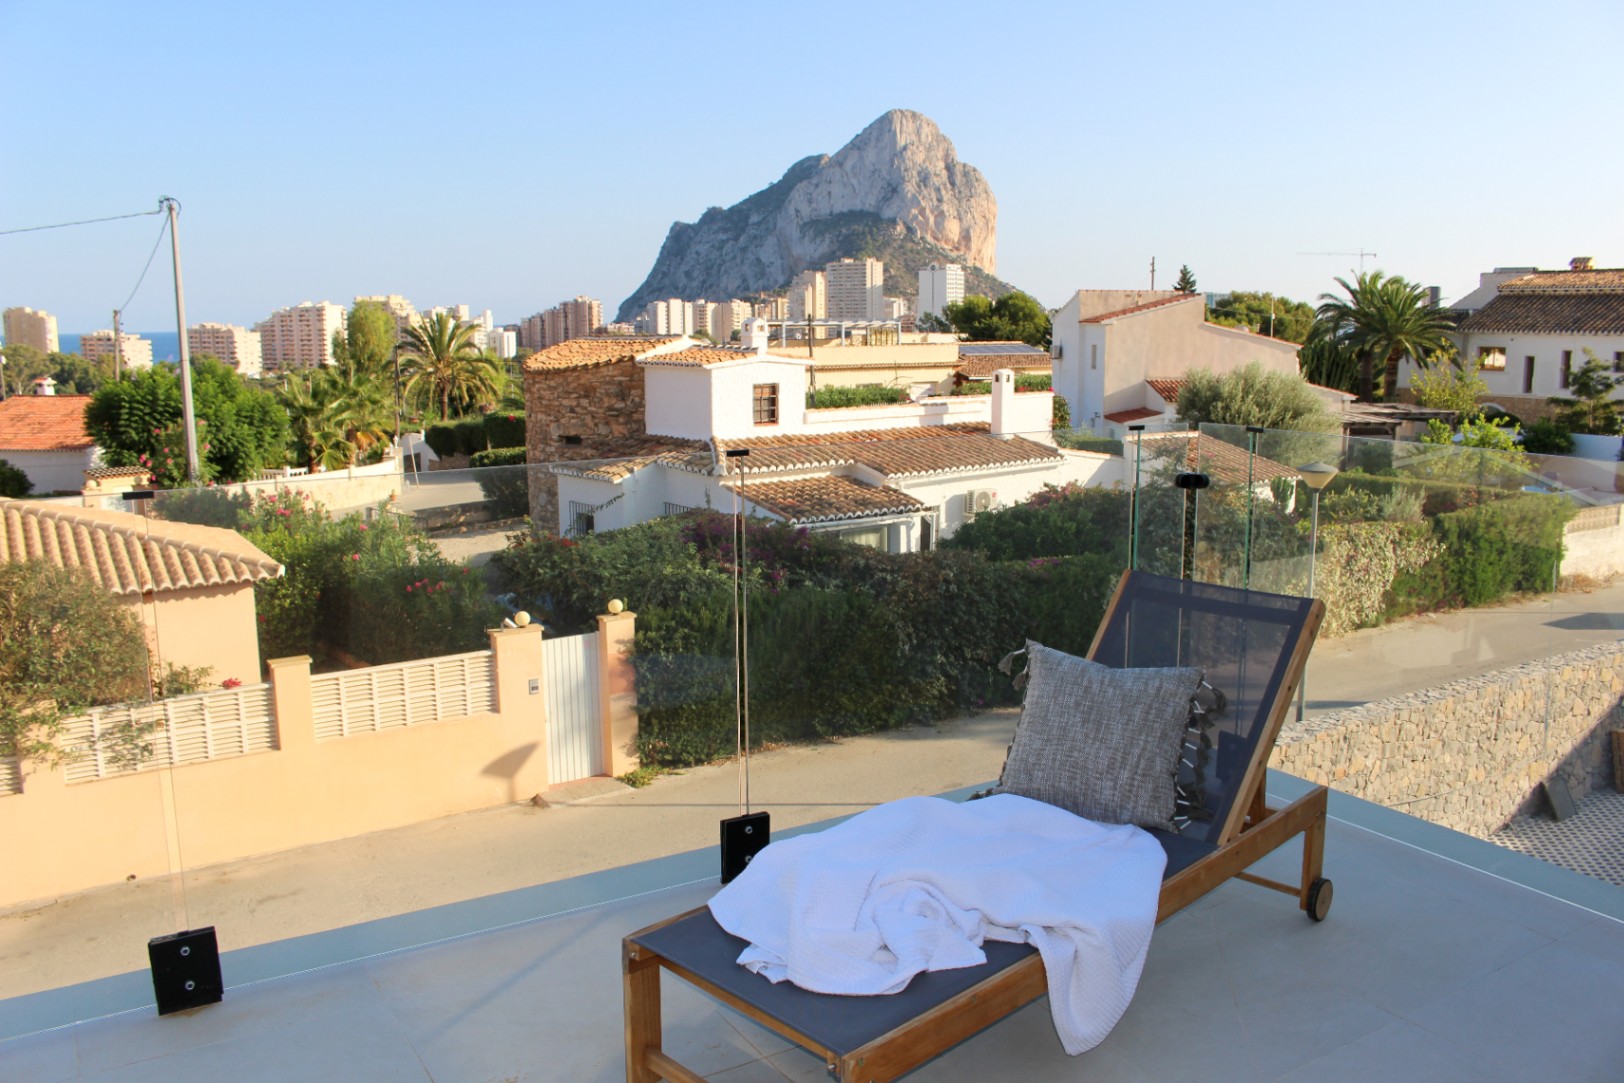 Photogallery - 28 - Exceptional homes in the Costa Blanca. Unparalleled Service. Exceptional properties in the Costa Blanca